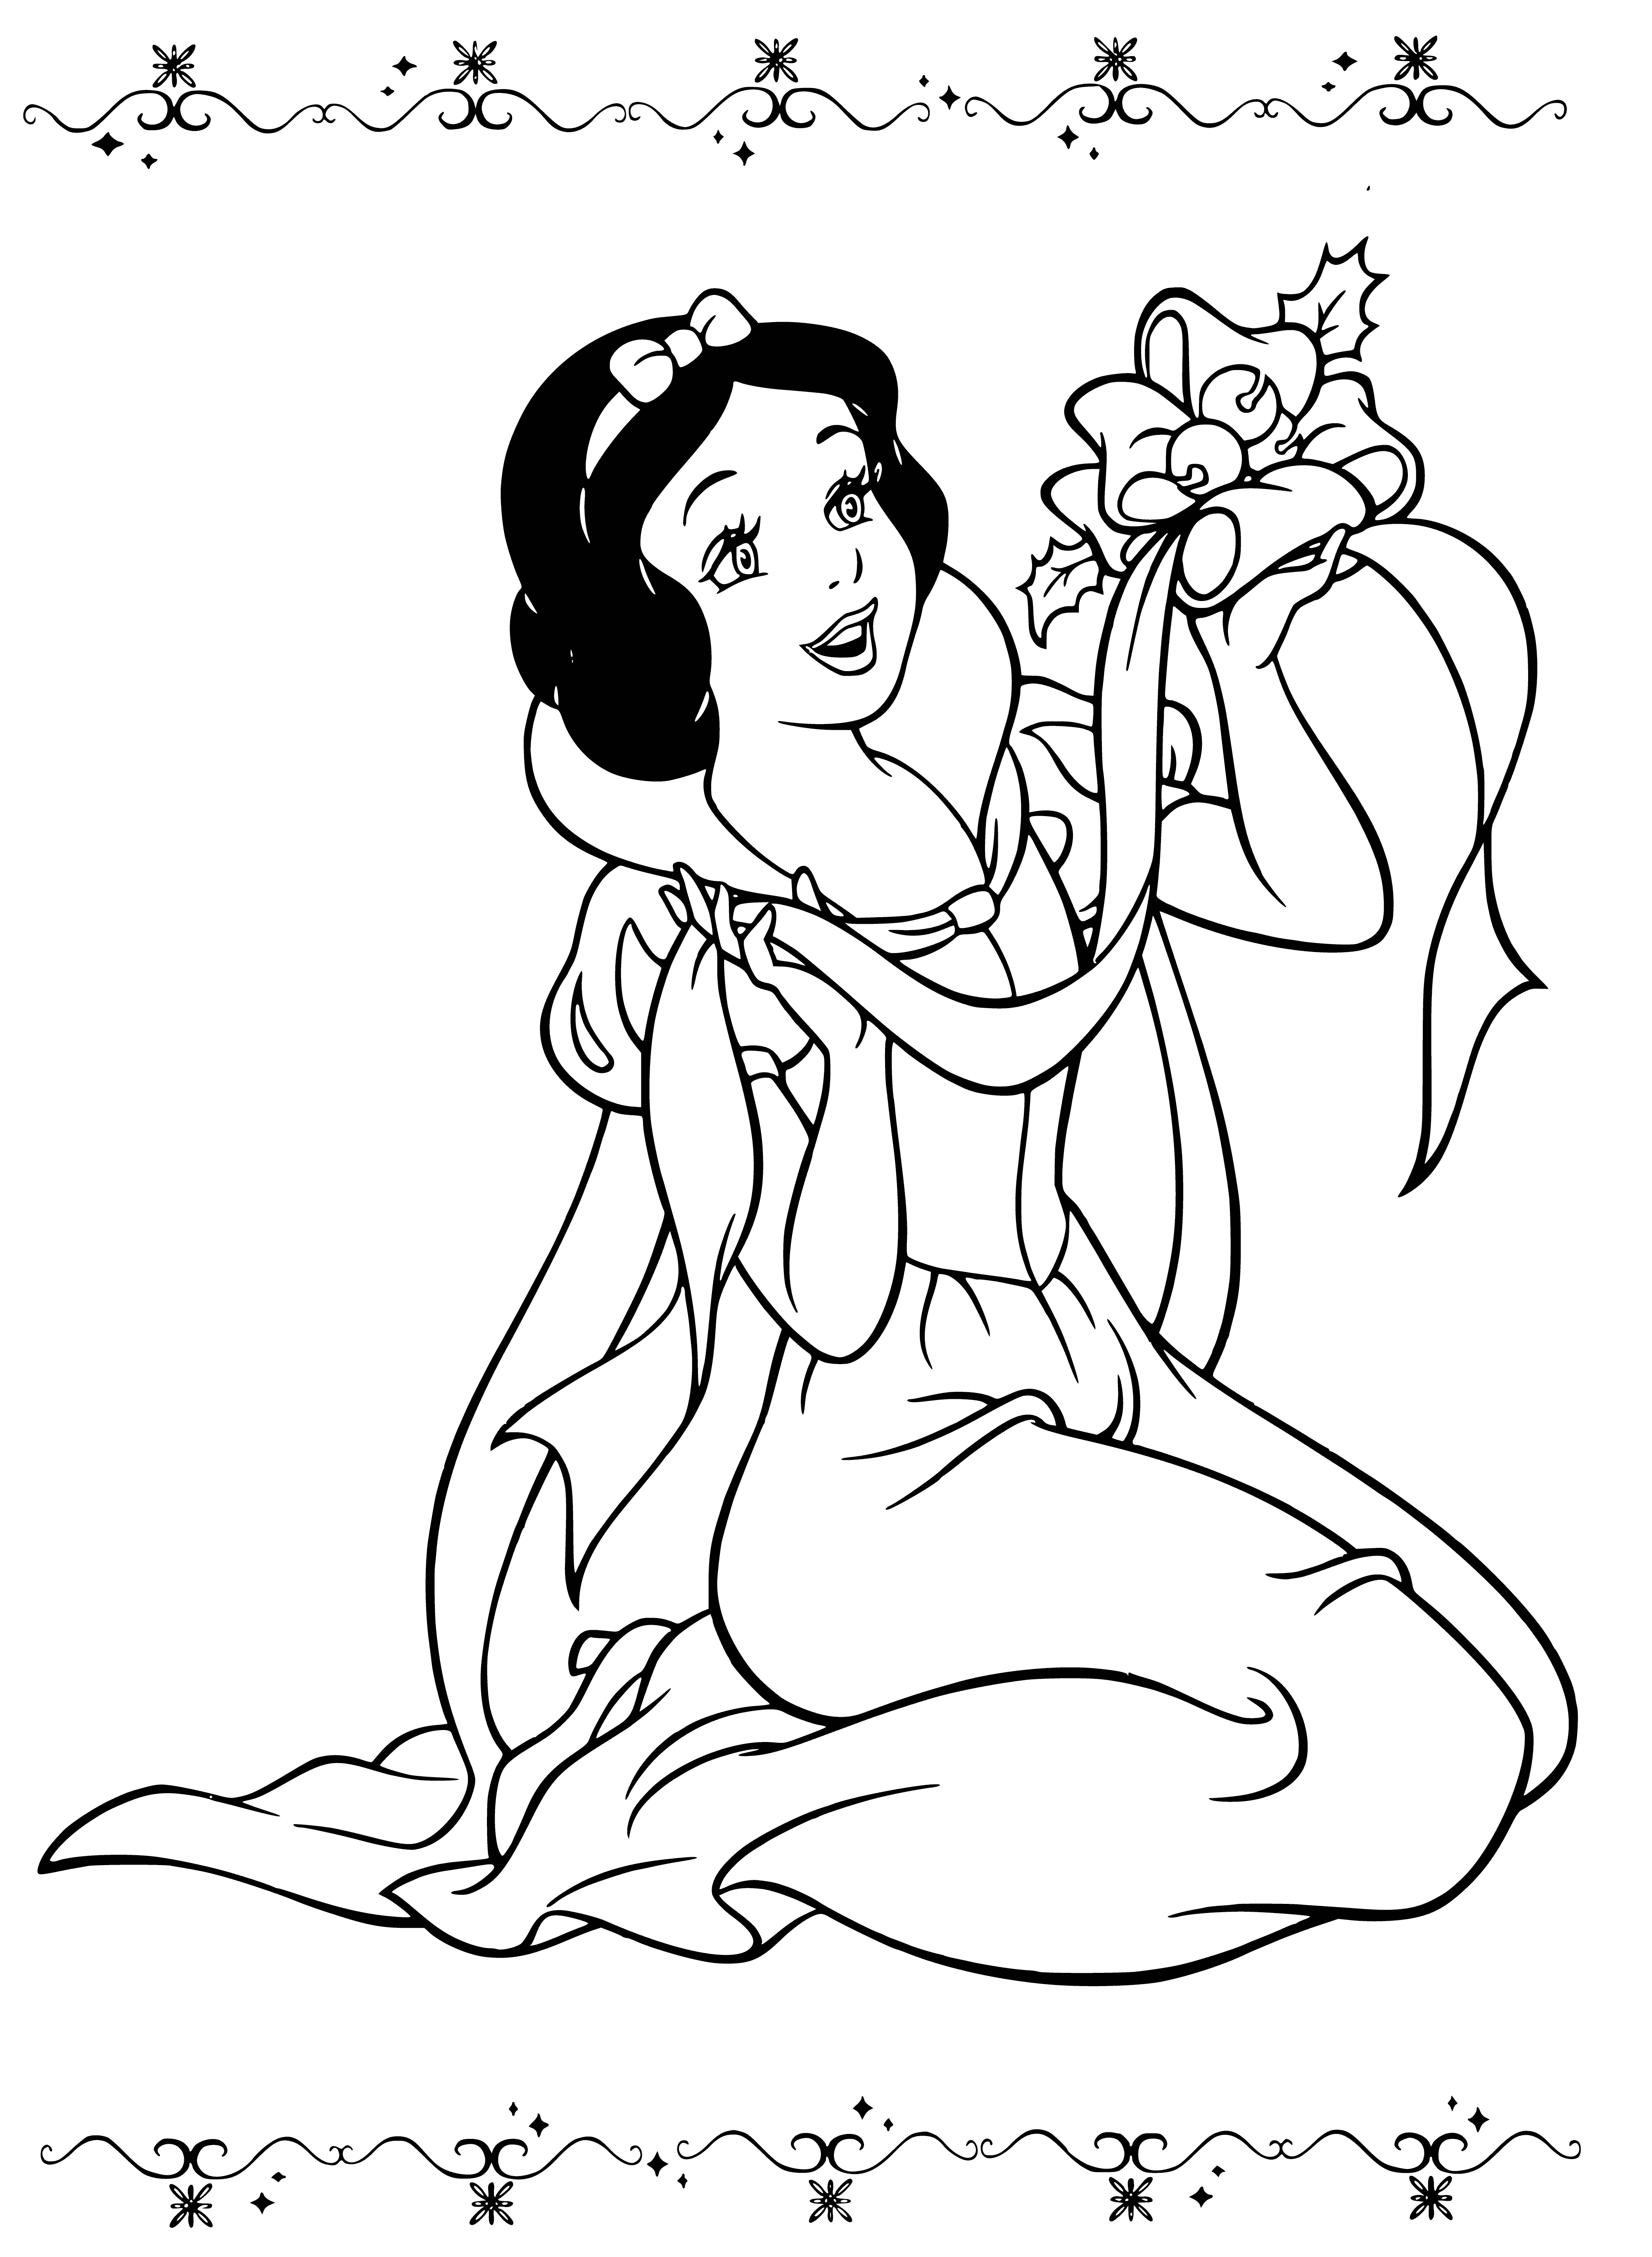 Snow White admires the Christmas tree decoration coloring page